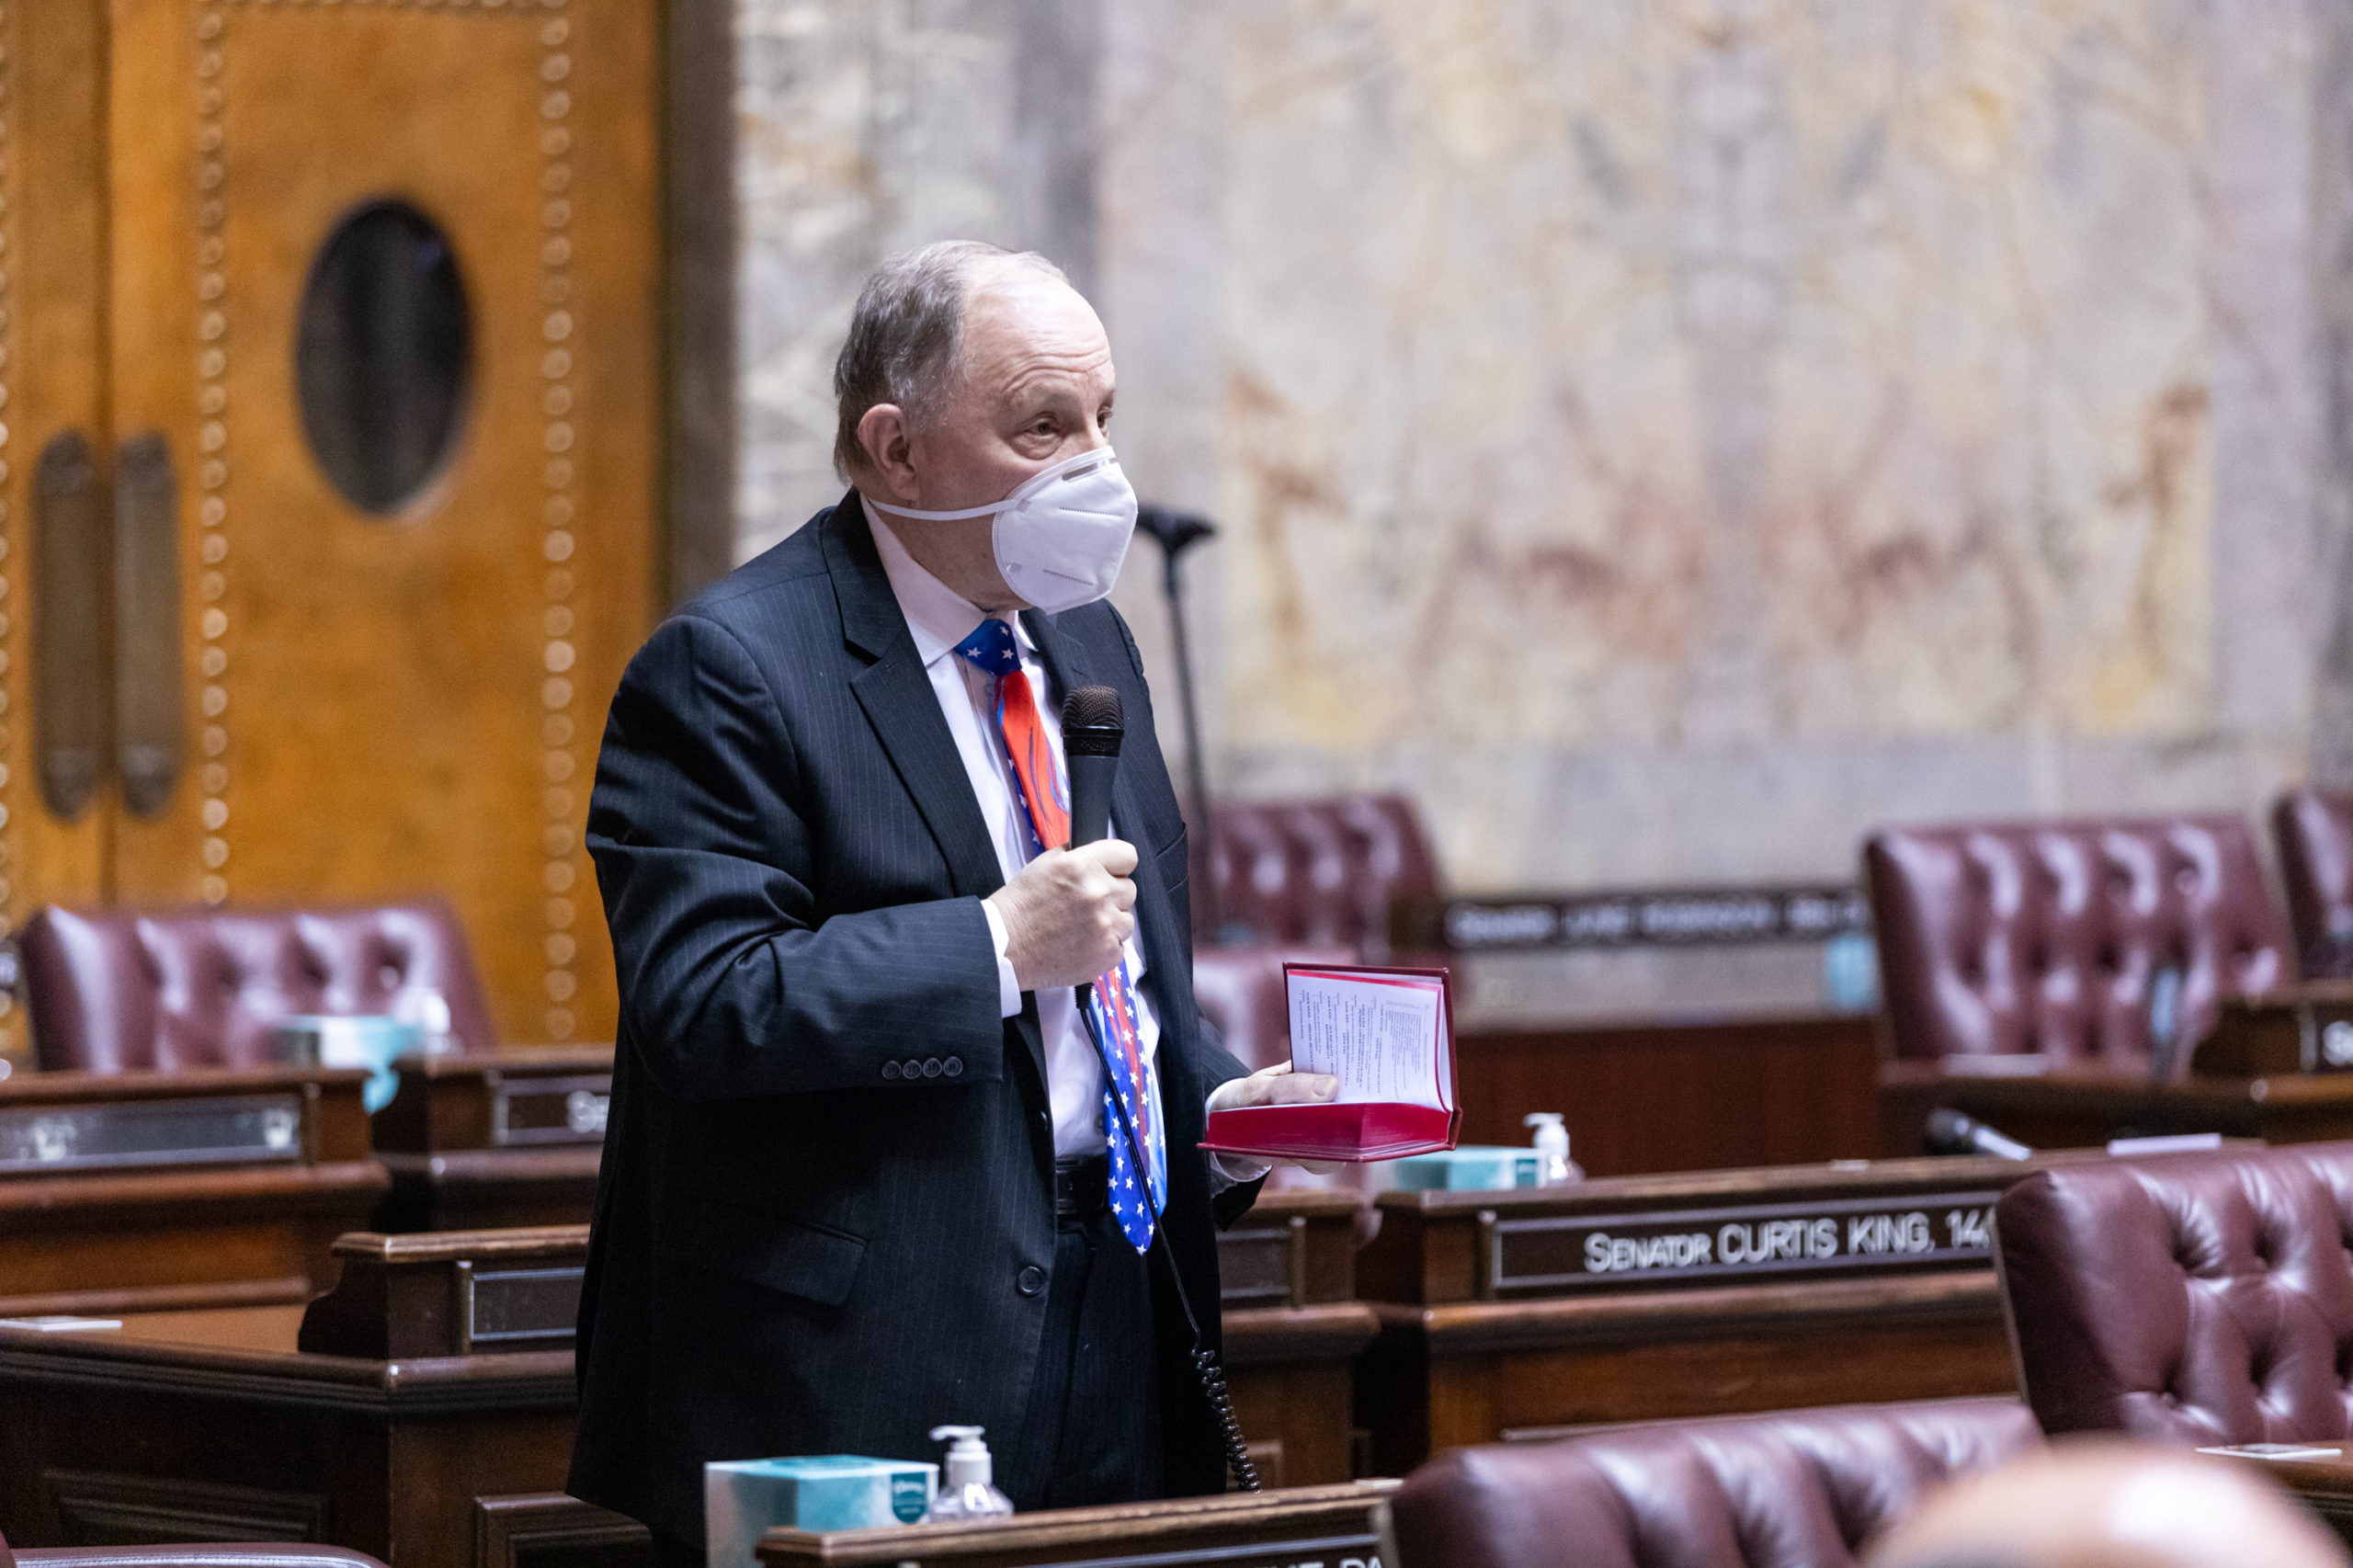 SRC On Air: Sen. Padden featured in Spokane Public Radio report: WA, ID Legislators Look To “Re-Balance” Relationships with Governors.